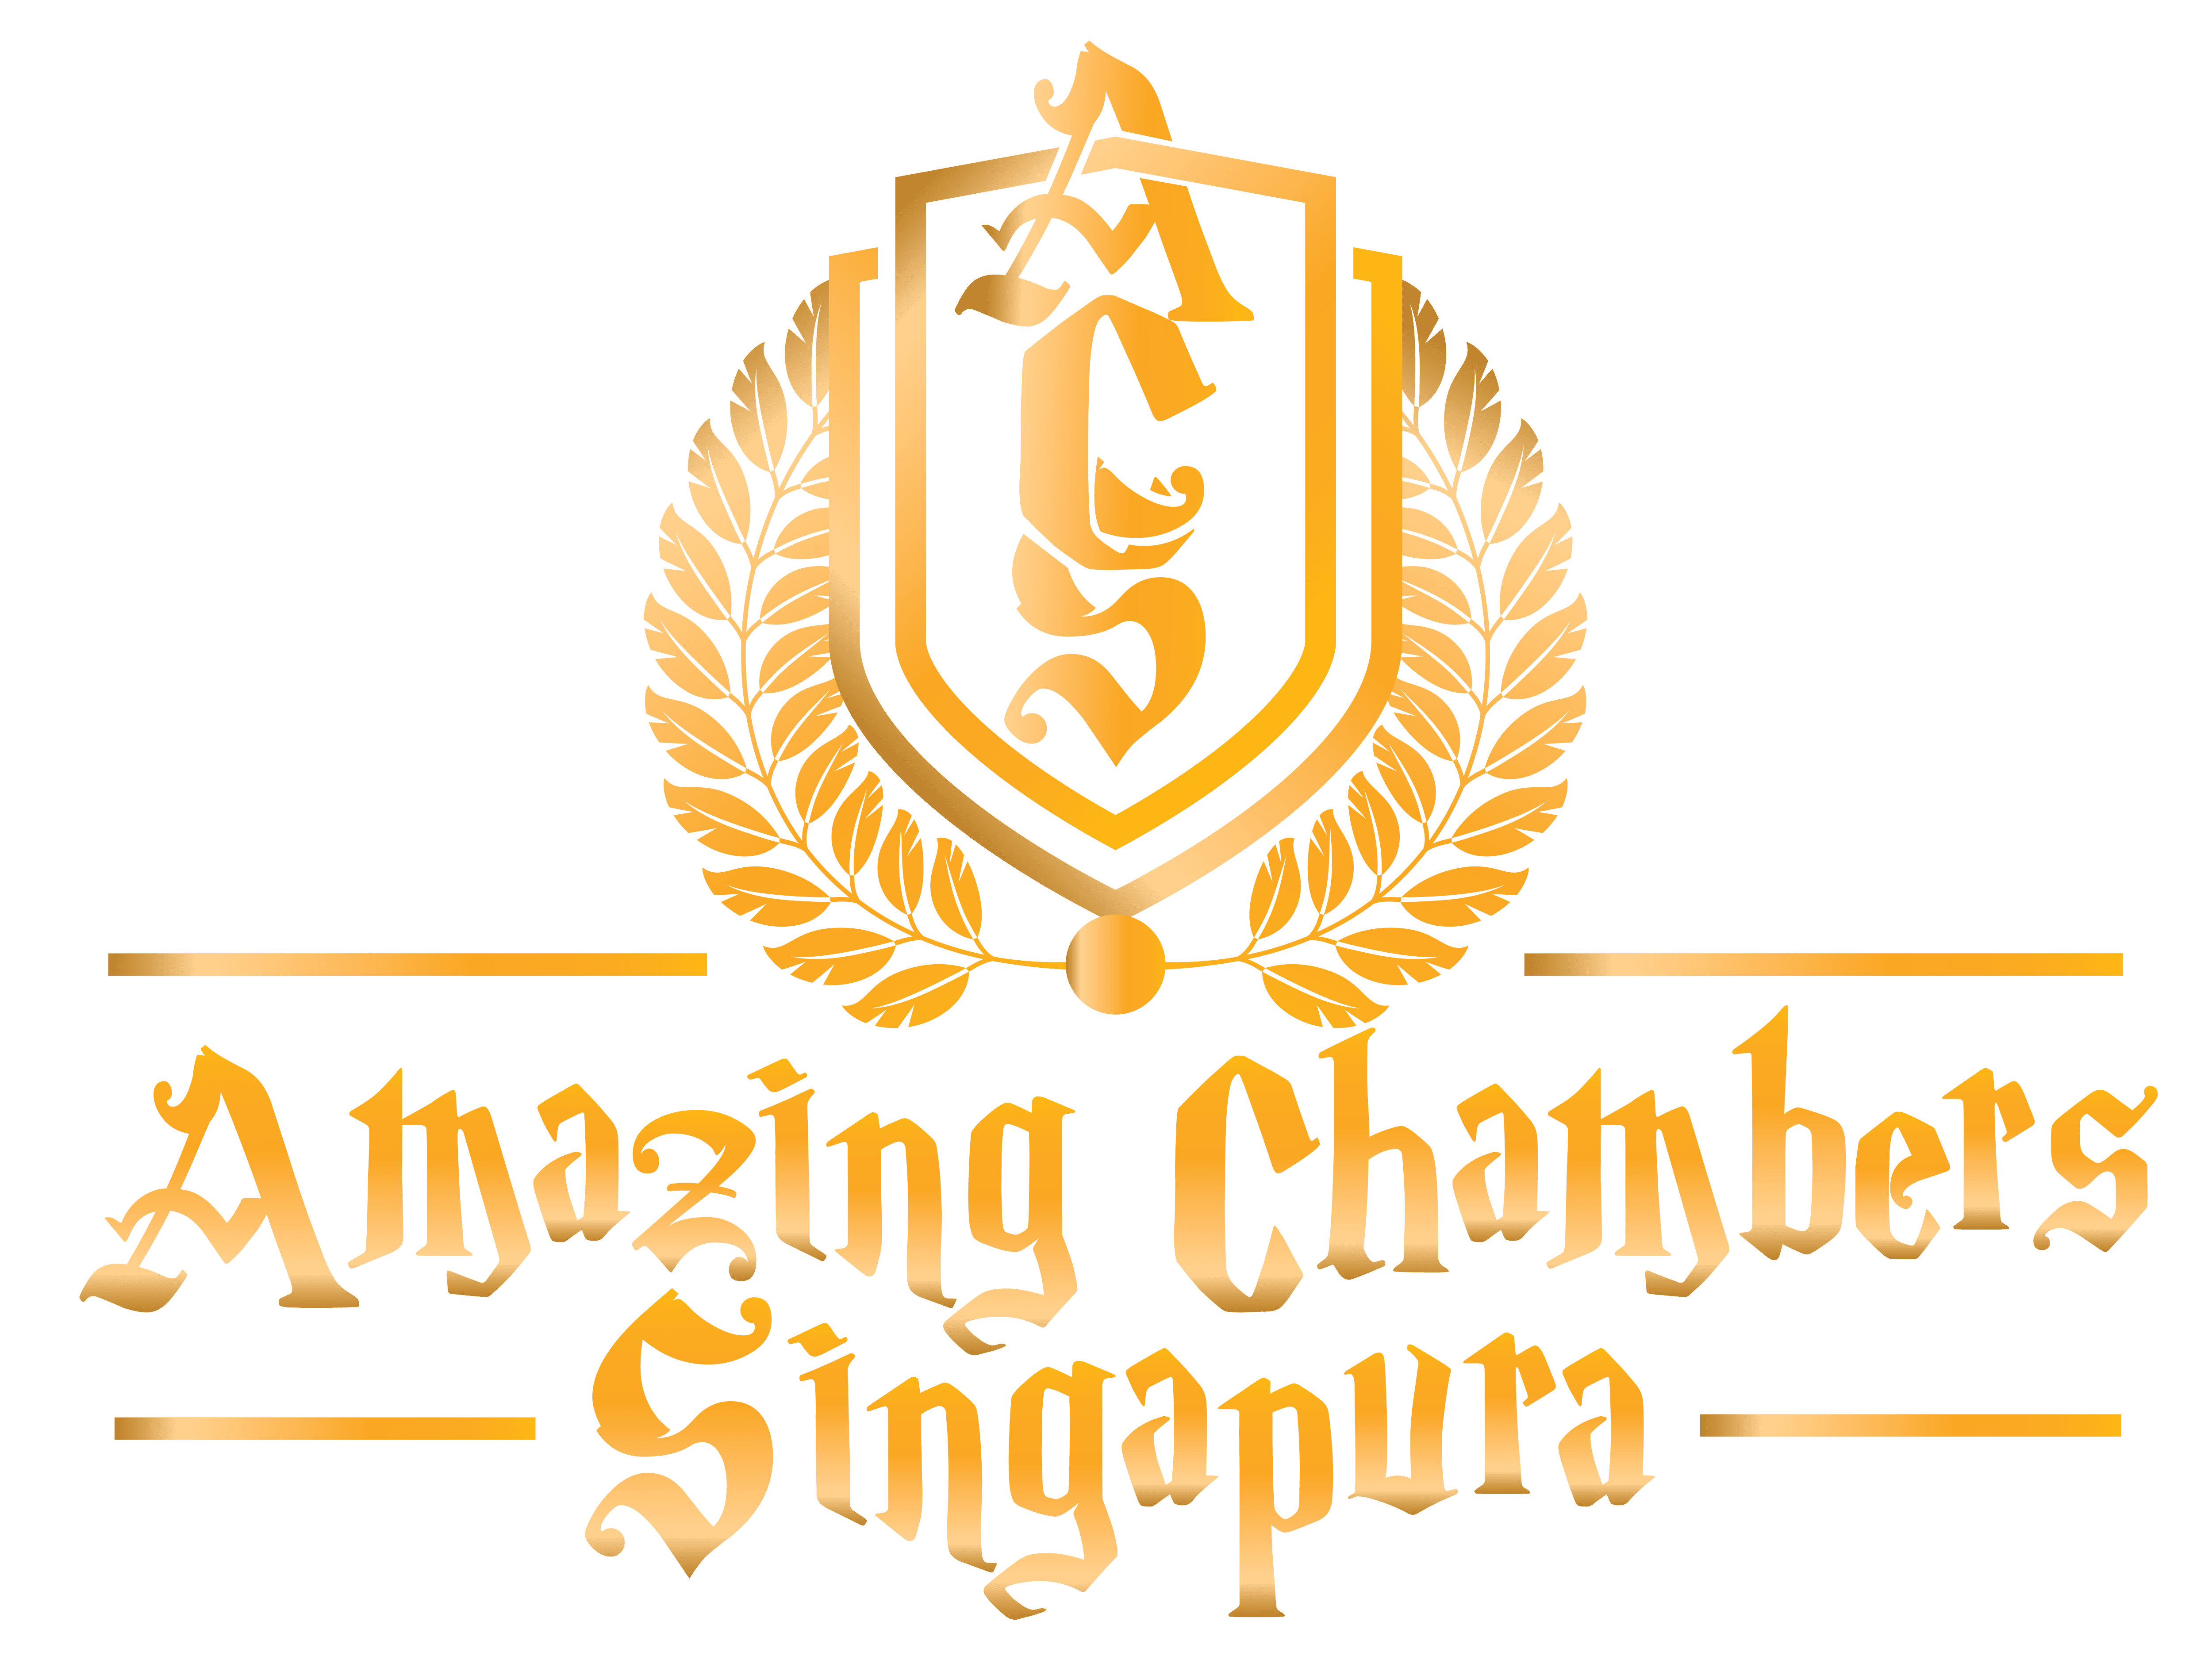 Amazing Chambers #1 Escape Room in Singapore